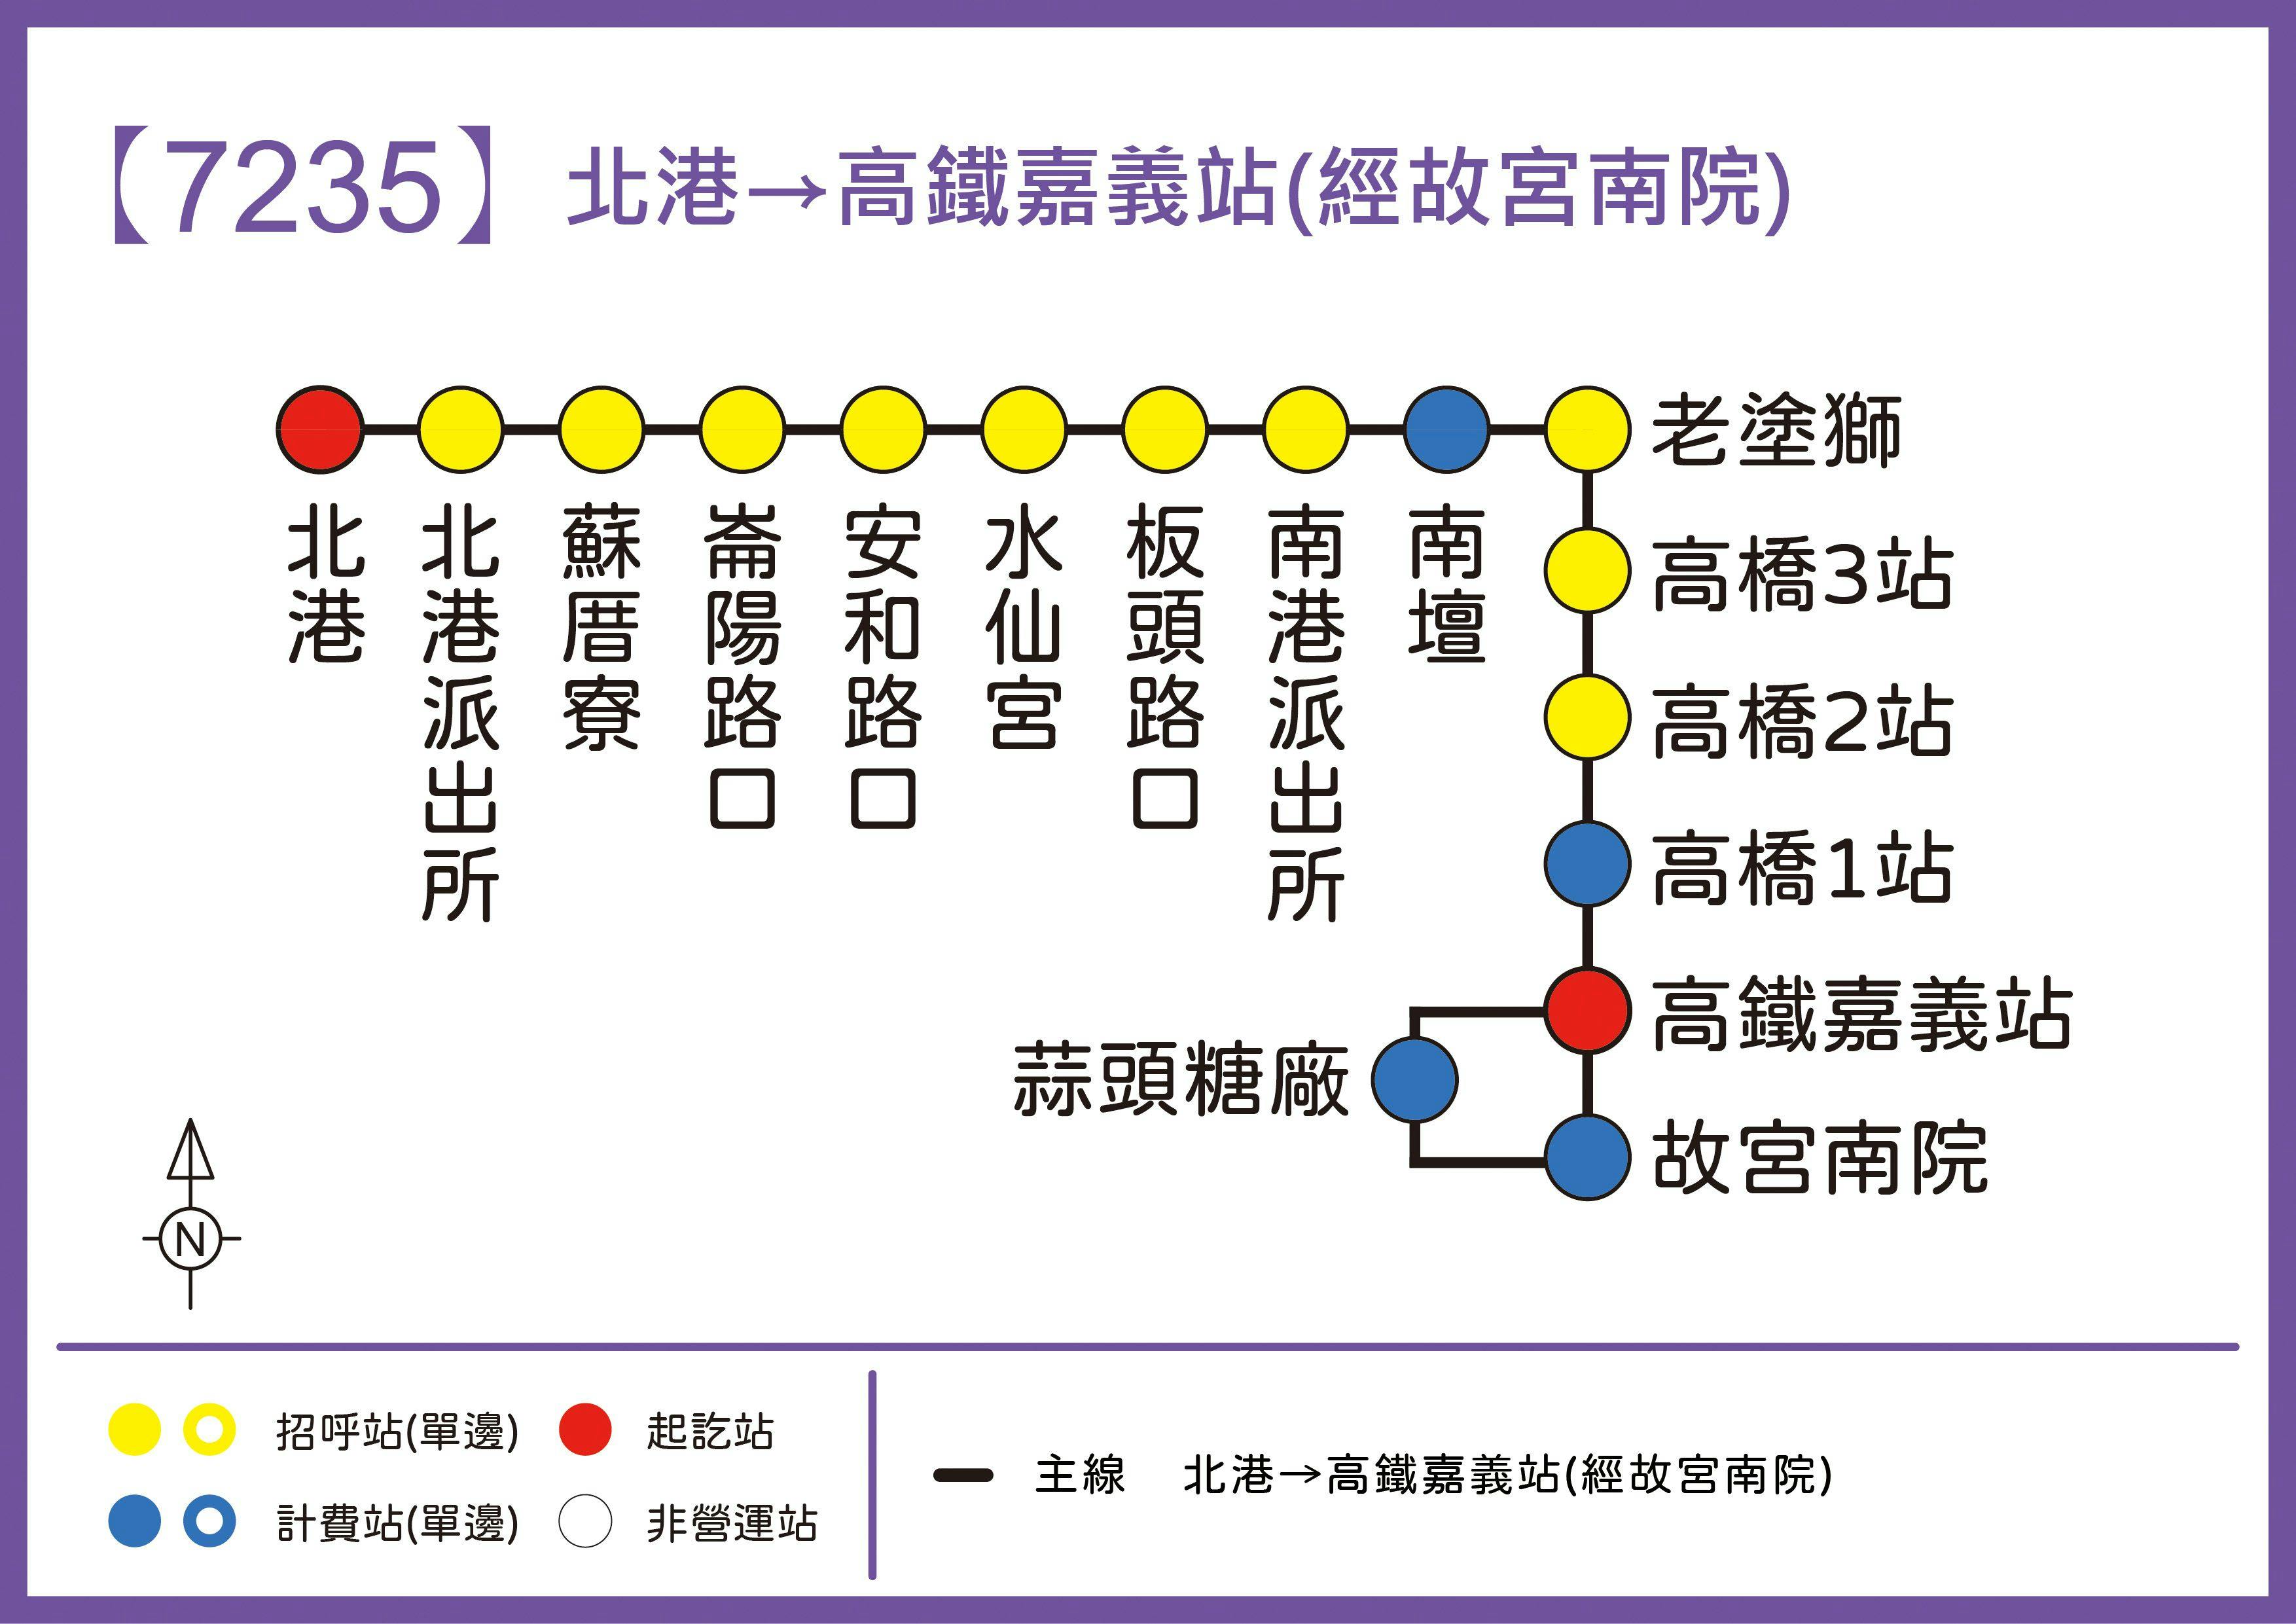 7235Route Map-Chiayi Bus